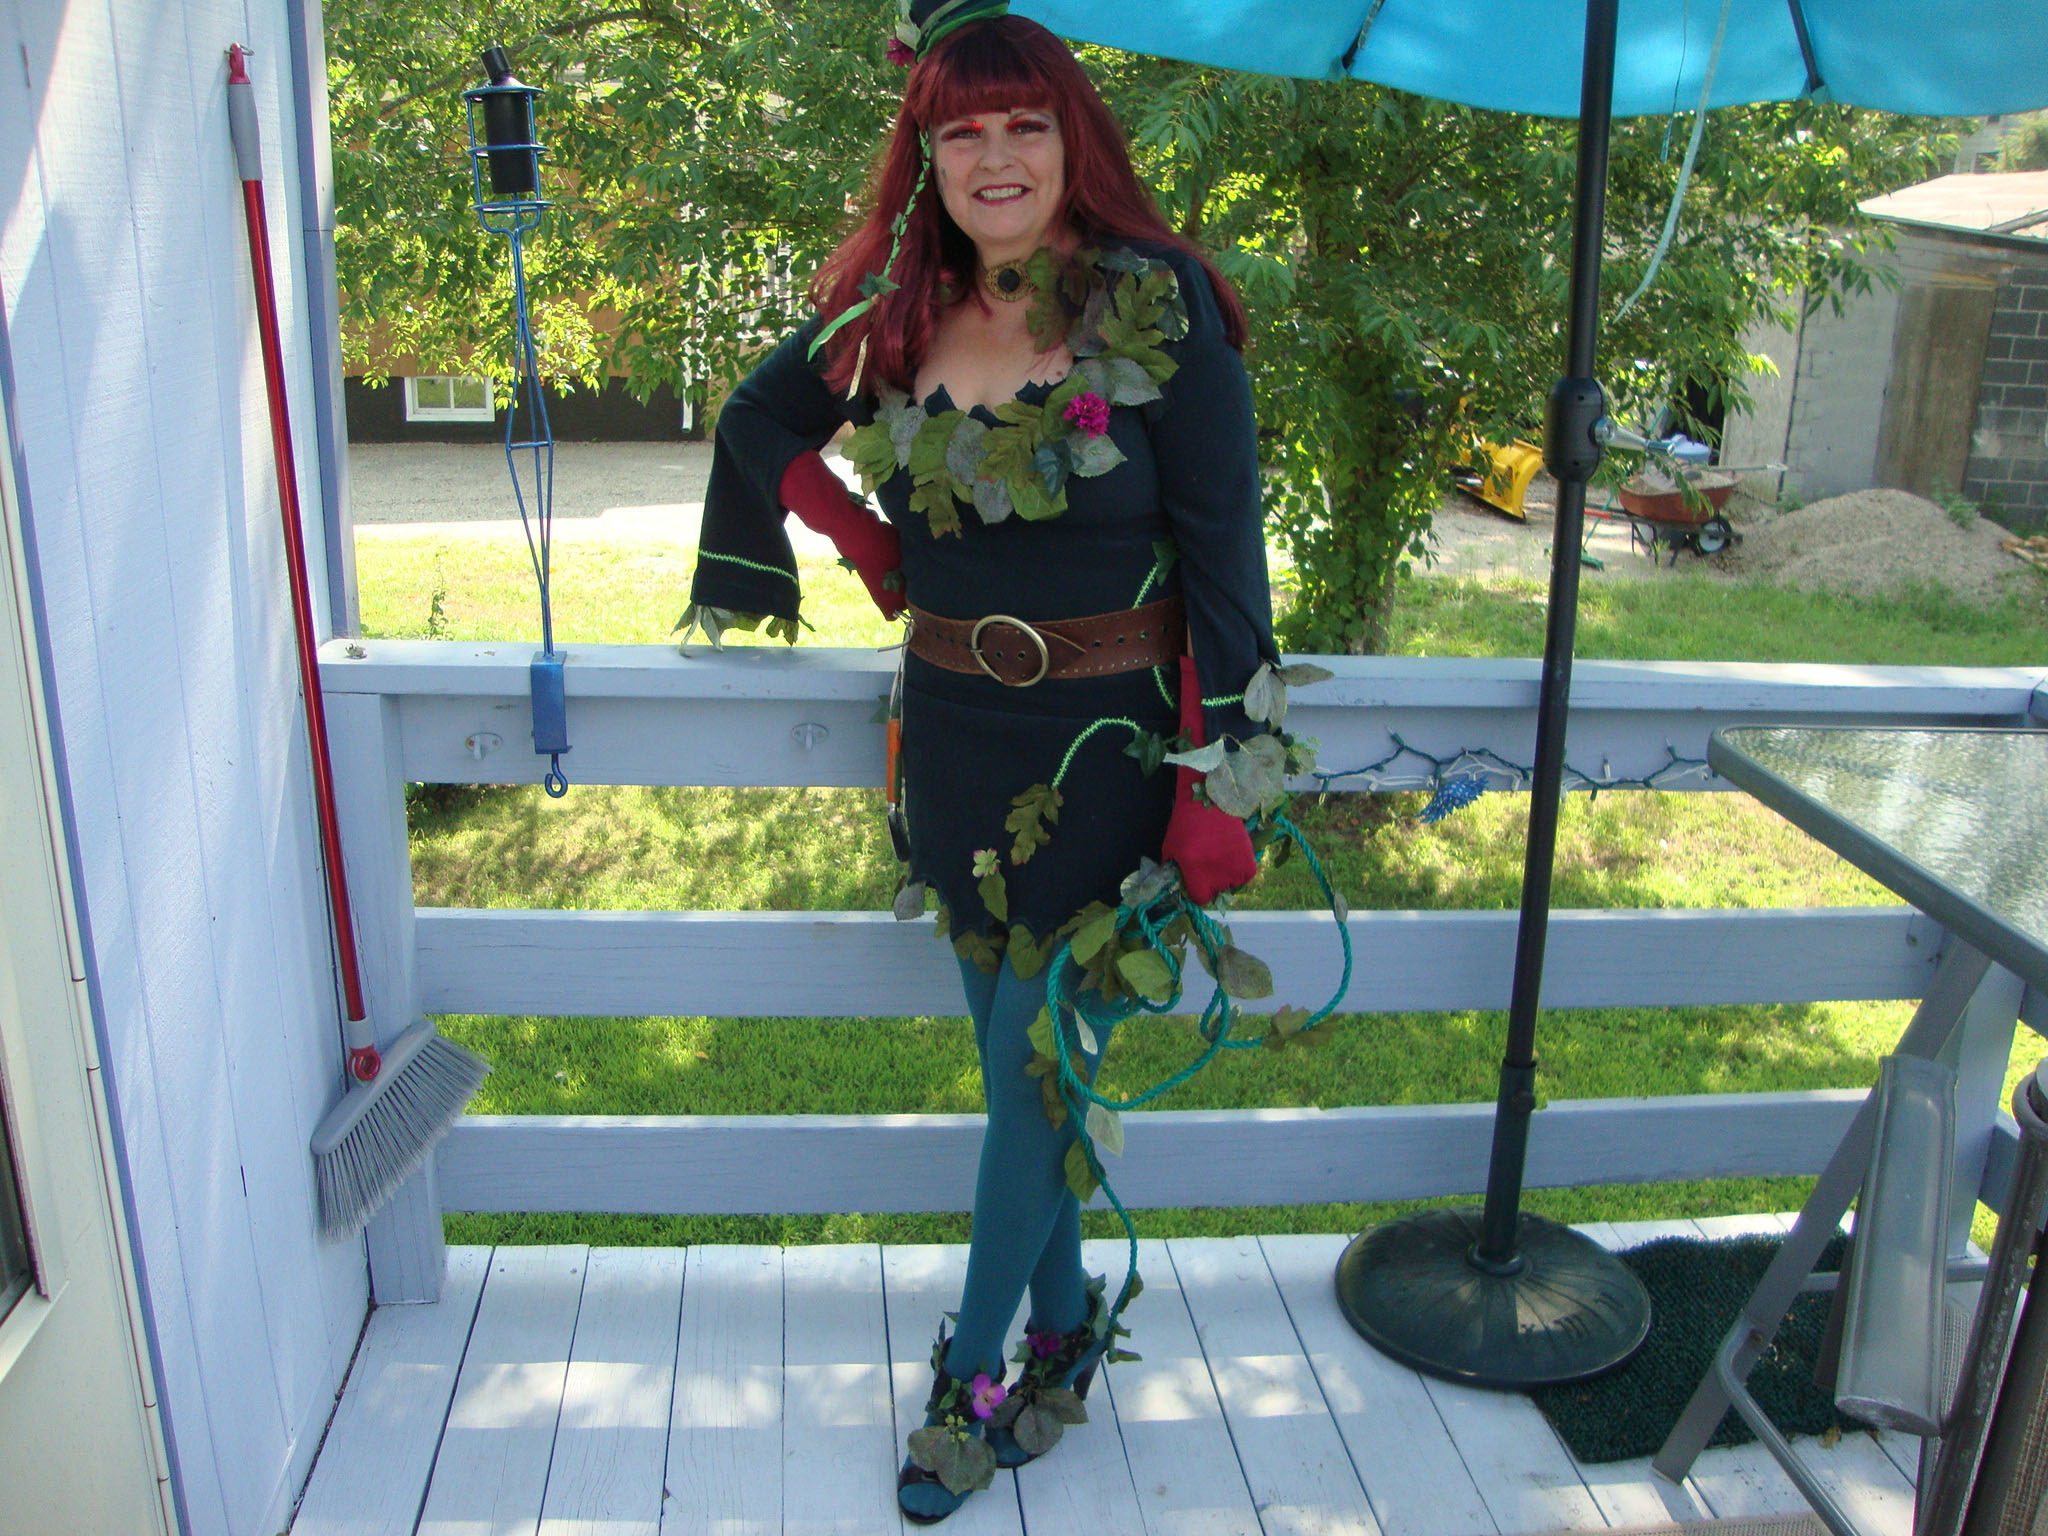 Cosplay self-design inspired by the Poison Ivy character in DC Comics